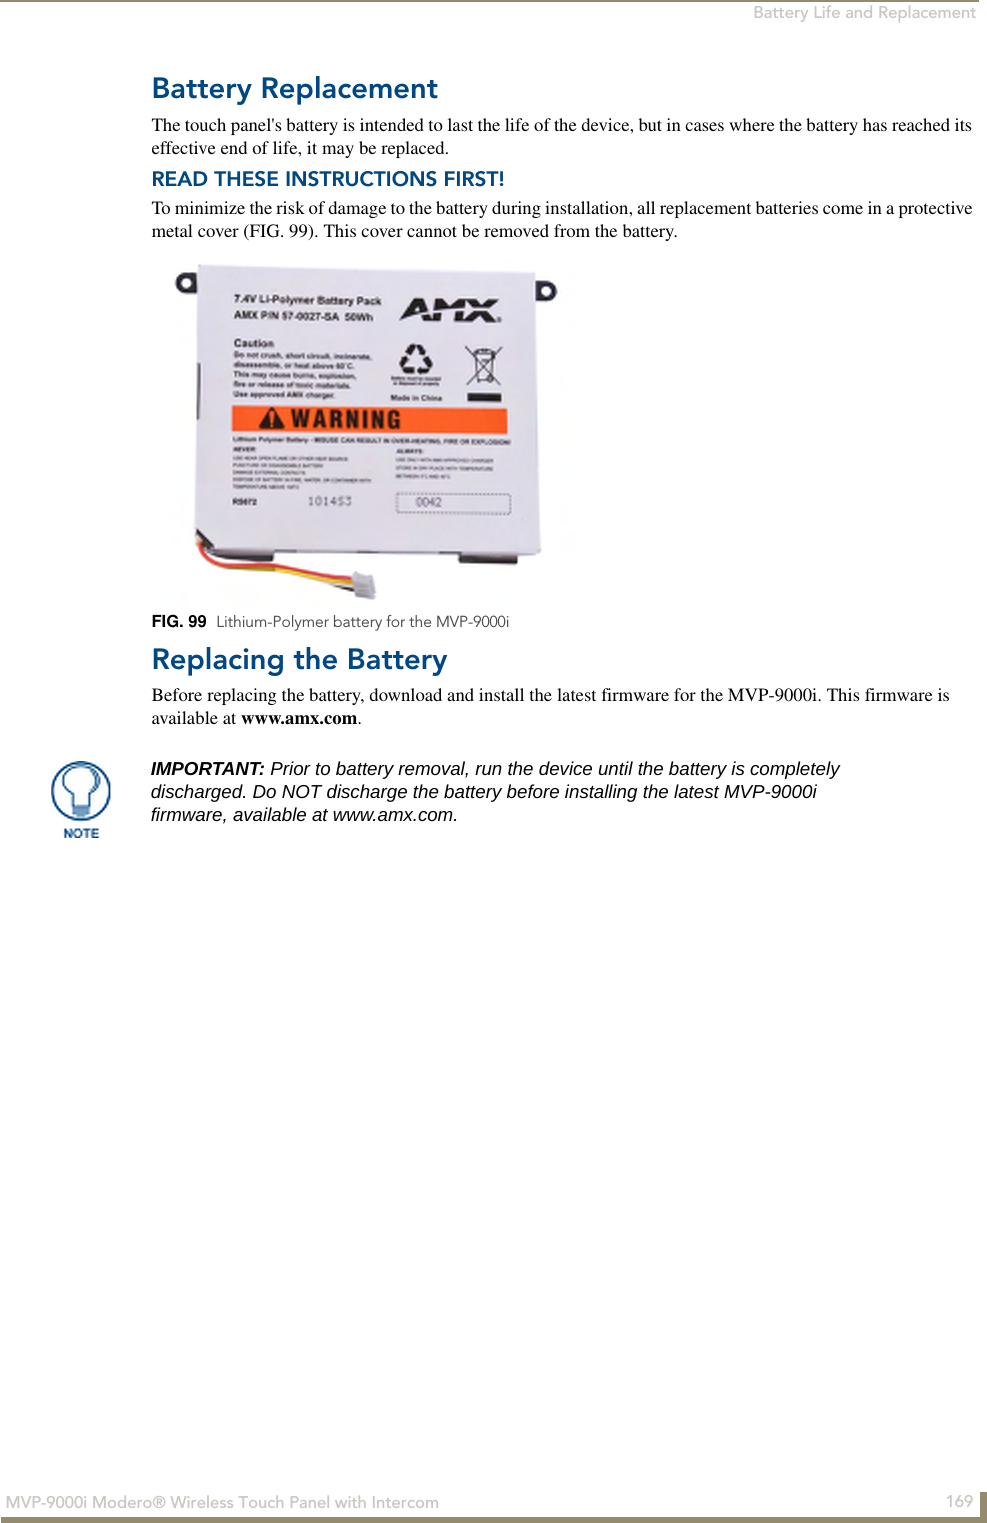 Battery Life and Replacement169MVP-9000i Modero® Wireless Touch Panel with IntercomBattery ReplacementThe touch panel&apos;s battery is intended to last the life of the device, but in cases where the battery has reached its effective end of life, it may be replaced.READ THESE INSTRUCTIONS FIRST!To minimize the risk of damage to the battery during installation, all replacement batteries come in a protective metal cover (FIG. 99). This cover cannot be removed from the battery.Replacing the BatteryBefore replacing the battery, download and install the latest firmware for the MVP-9000i. This firmware is available at www.amx.com.FIG. 99  Lithium-Polymer battery for the MVP-9000iIMPORTANT: Prior to battery removal, run the device until the battery is completely discharged. Do NOT discharge the battery before installing the latest MVP-9000i firmware, available at www.amx.com.